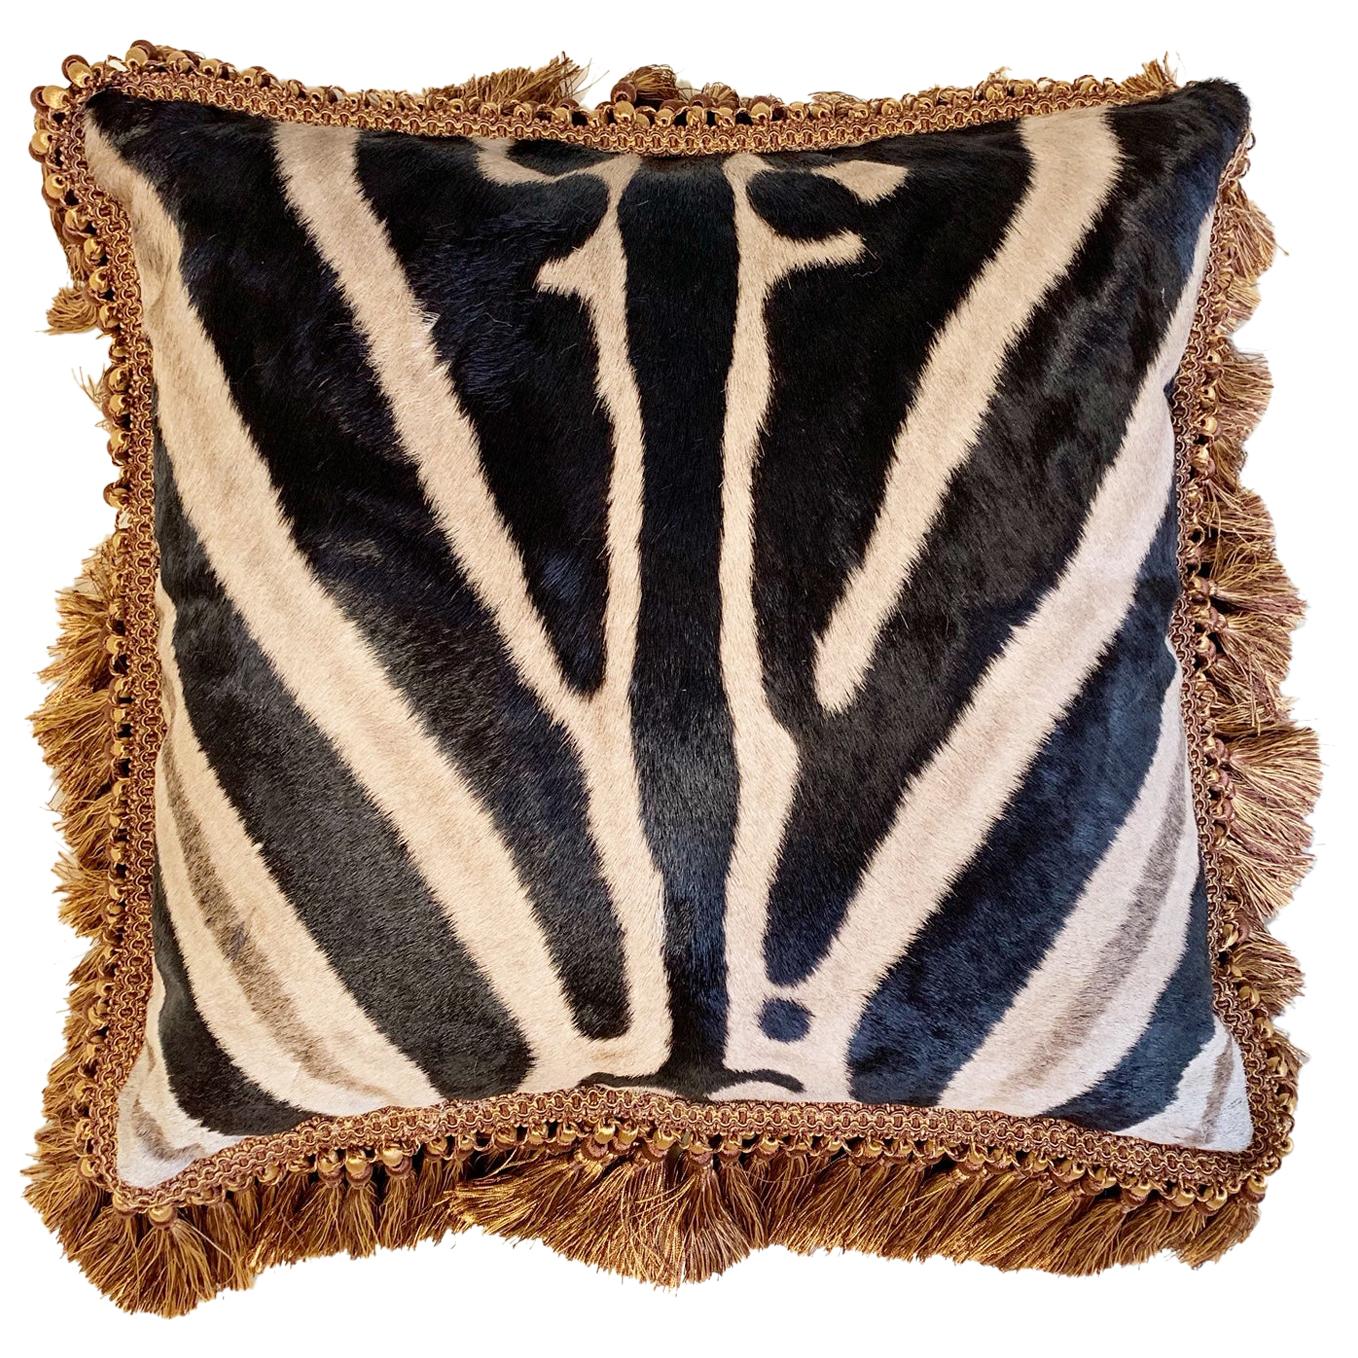 One of a Kind Zebra Pillow